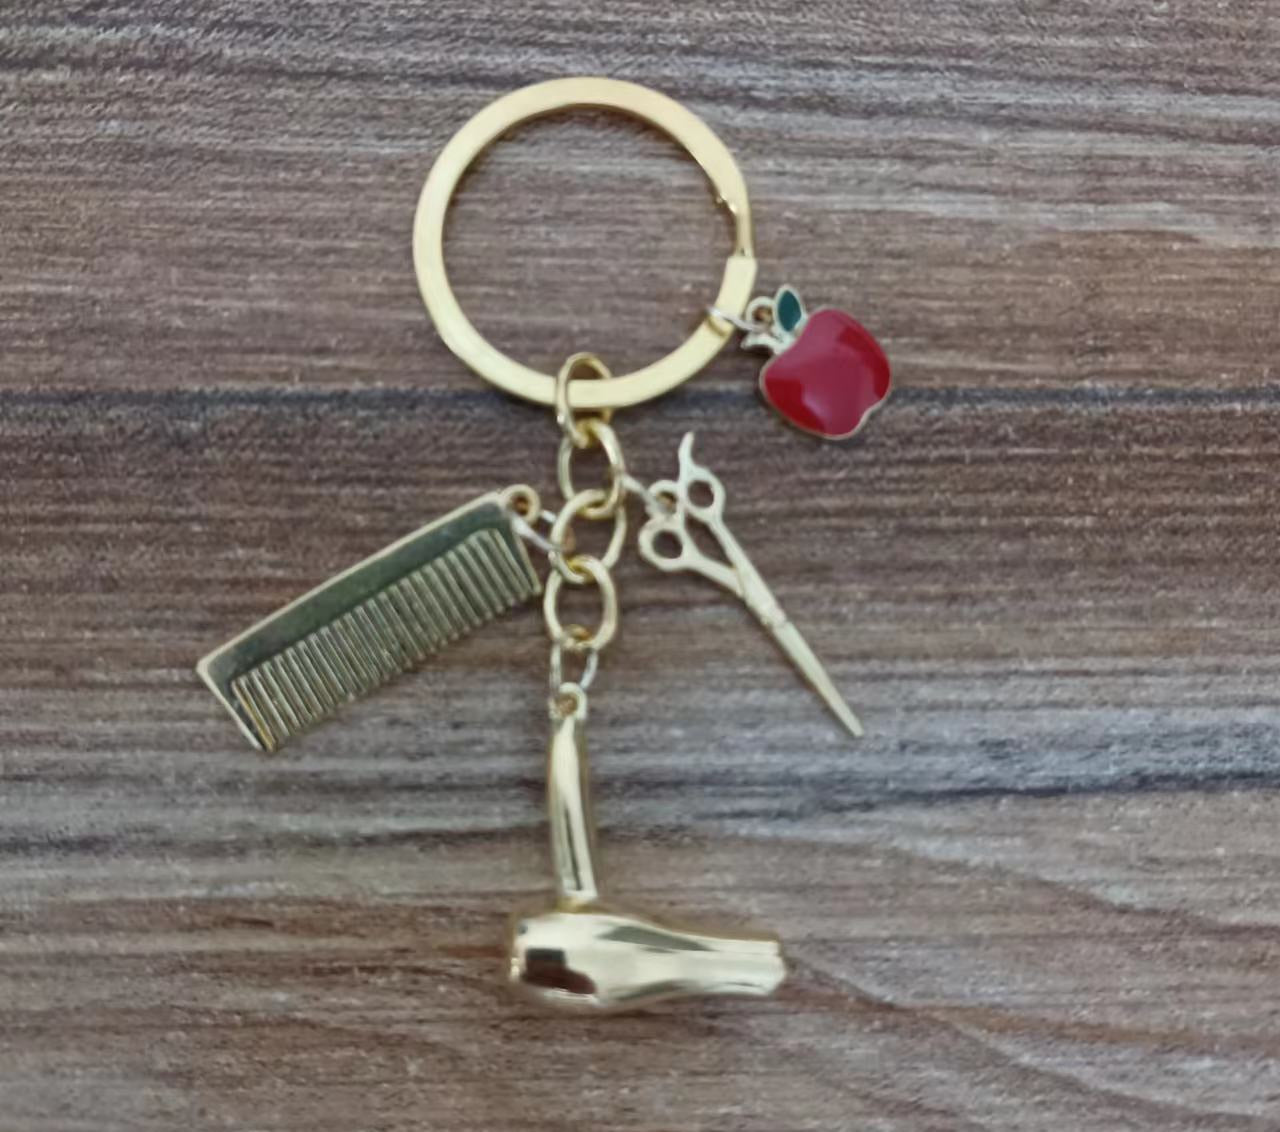 Charm Keychain Hairdresser Gift Comb Scissors Hair Dryer Car Interior Pendant Jewelry Gift Personality Keychain Personality - Charlie Dolly